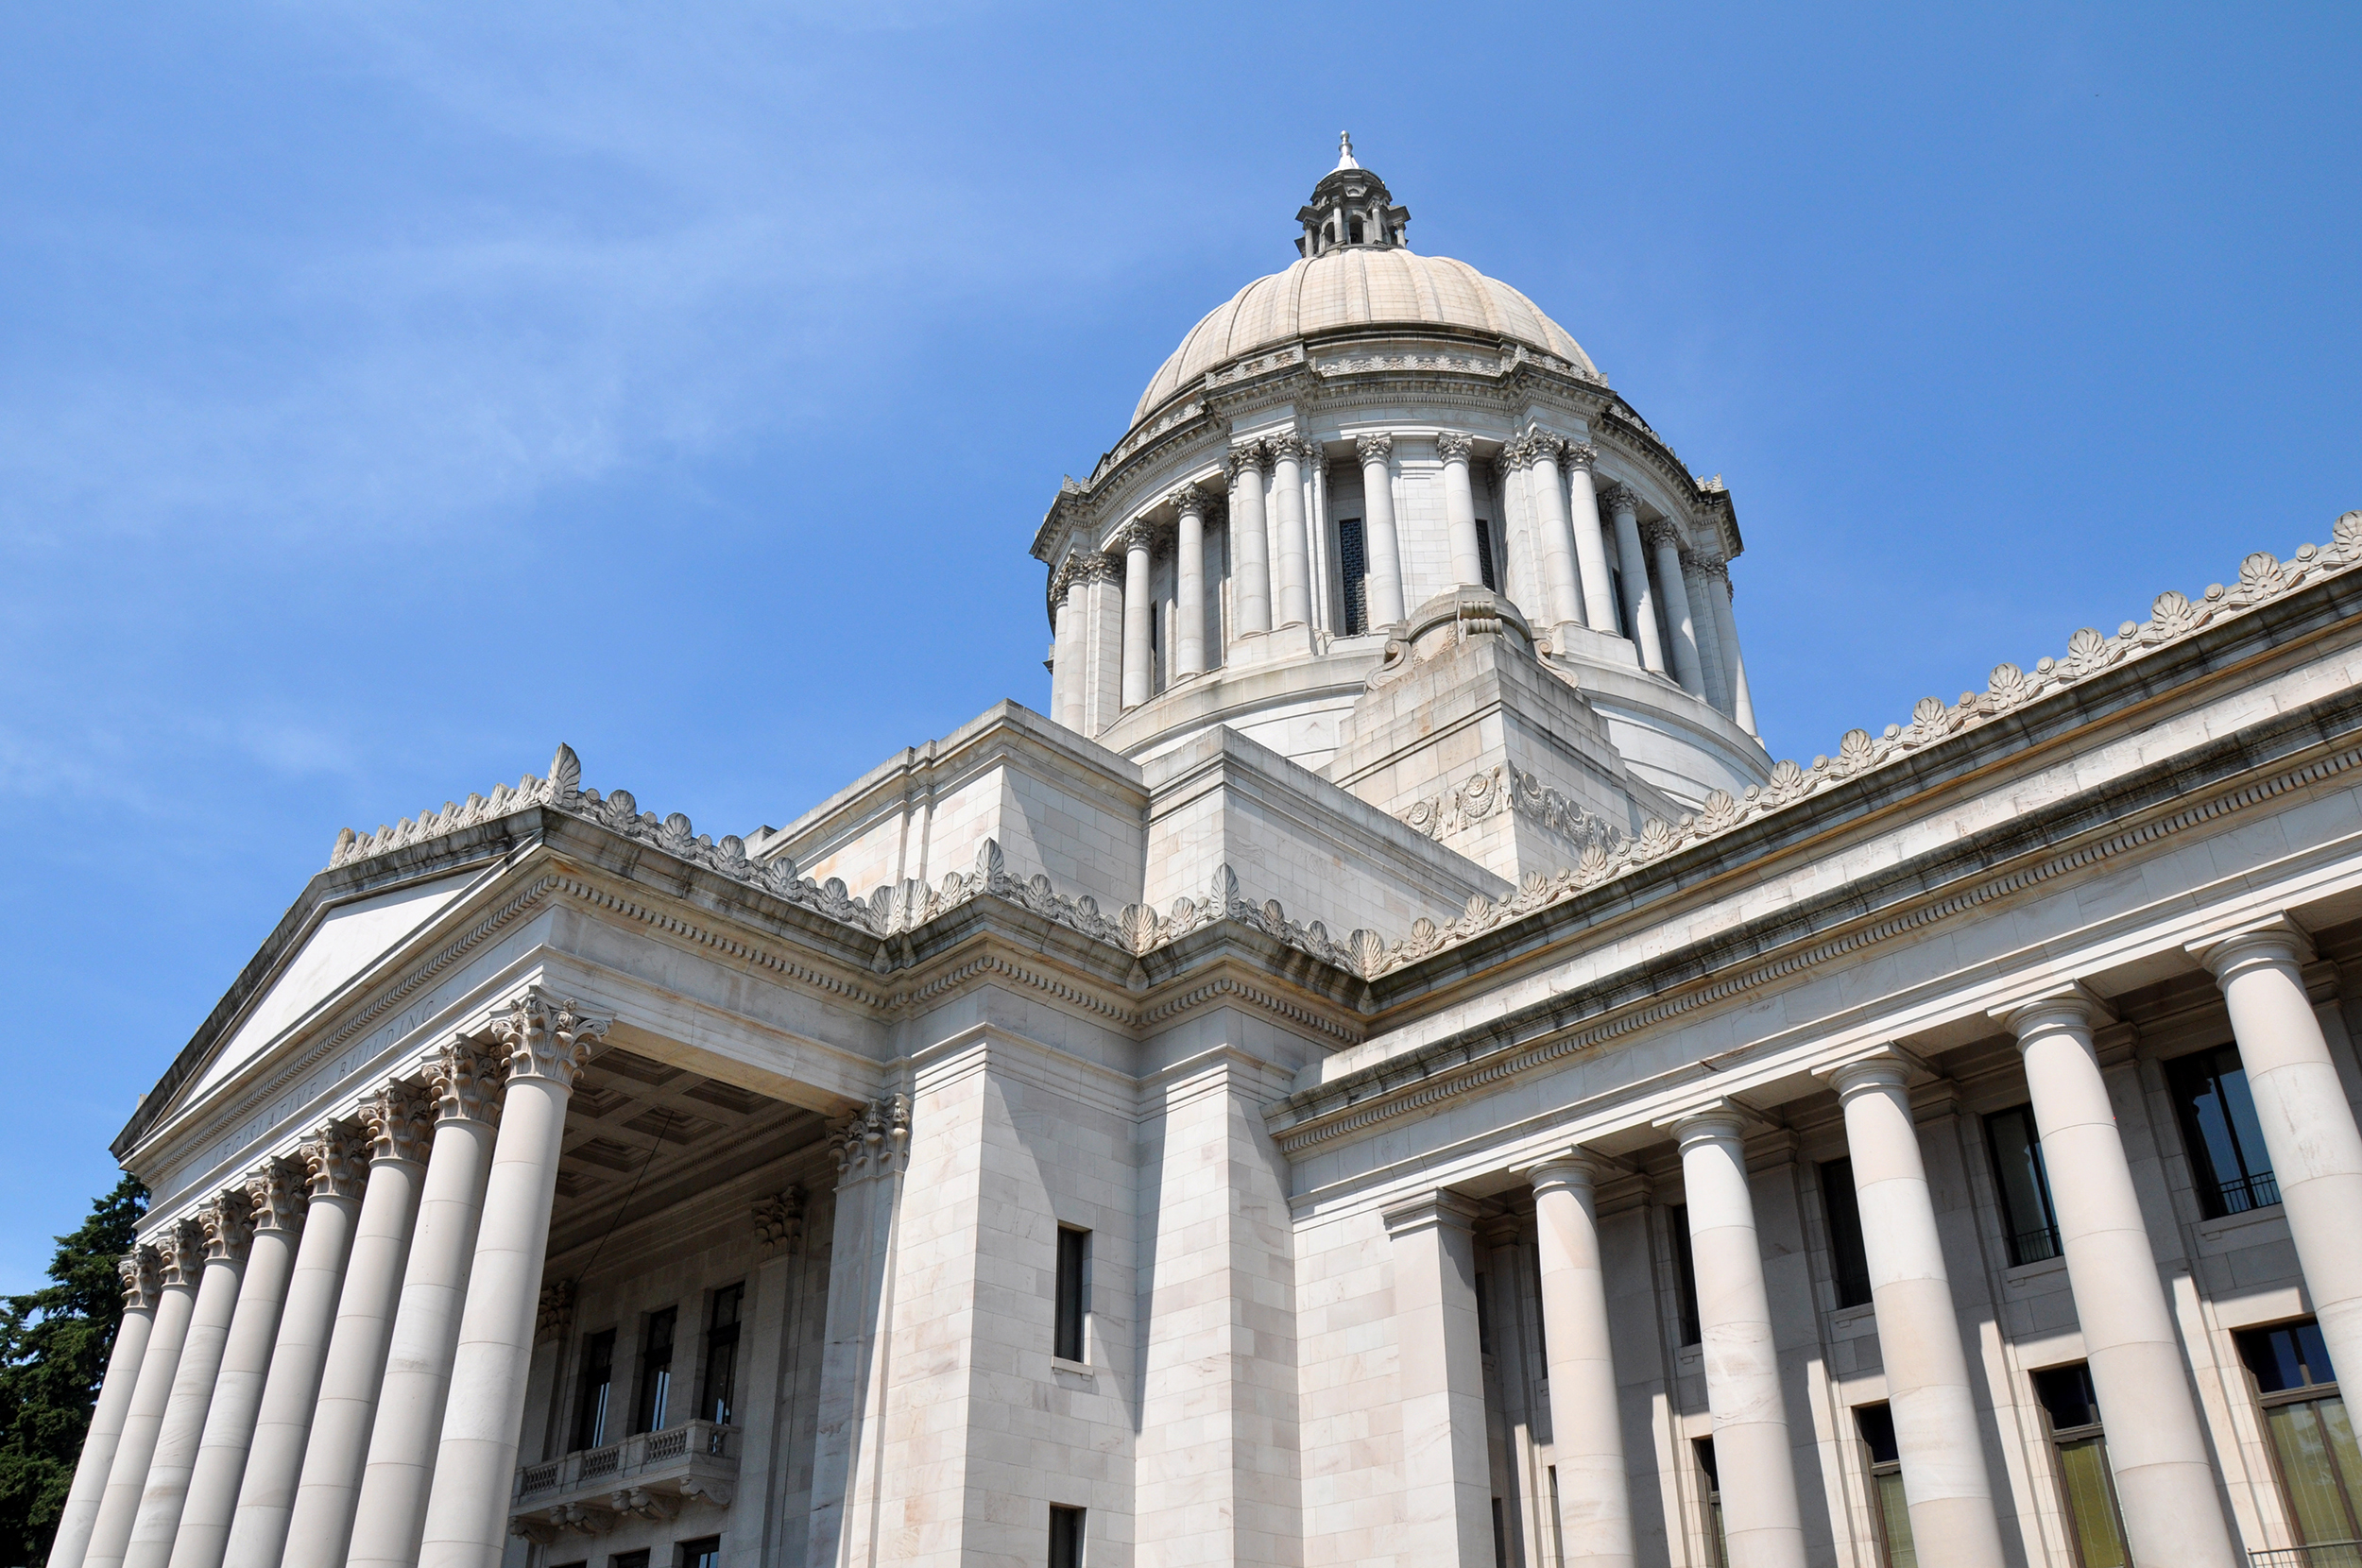 A photo of the Capitol of Olympia, Washington, taken at an upwards angle with a blue sky in the background